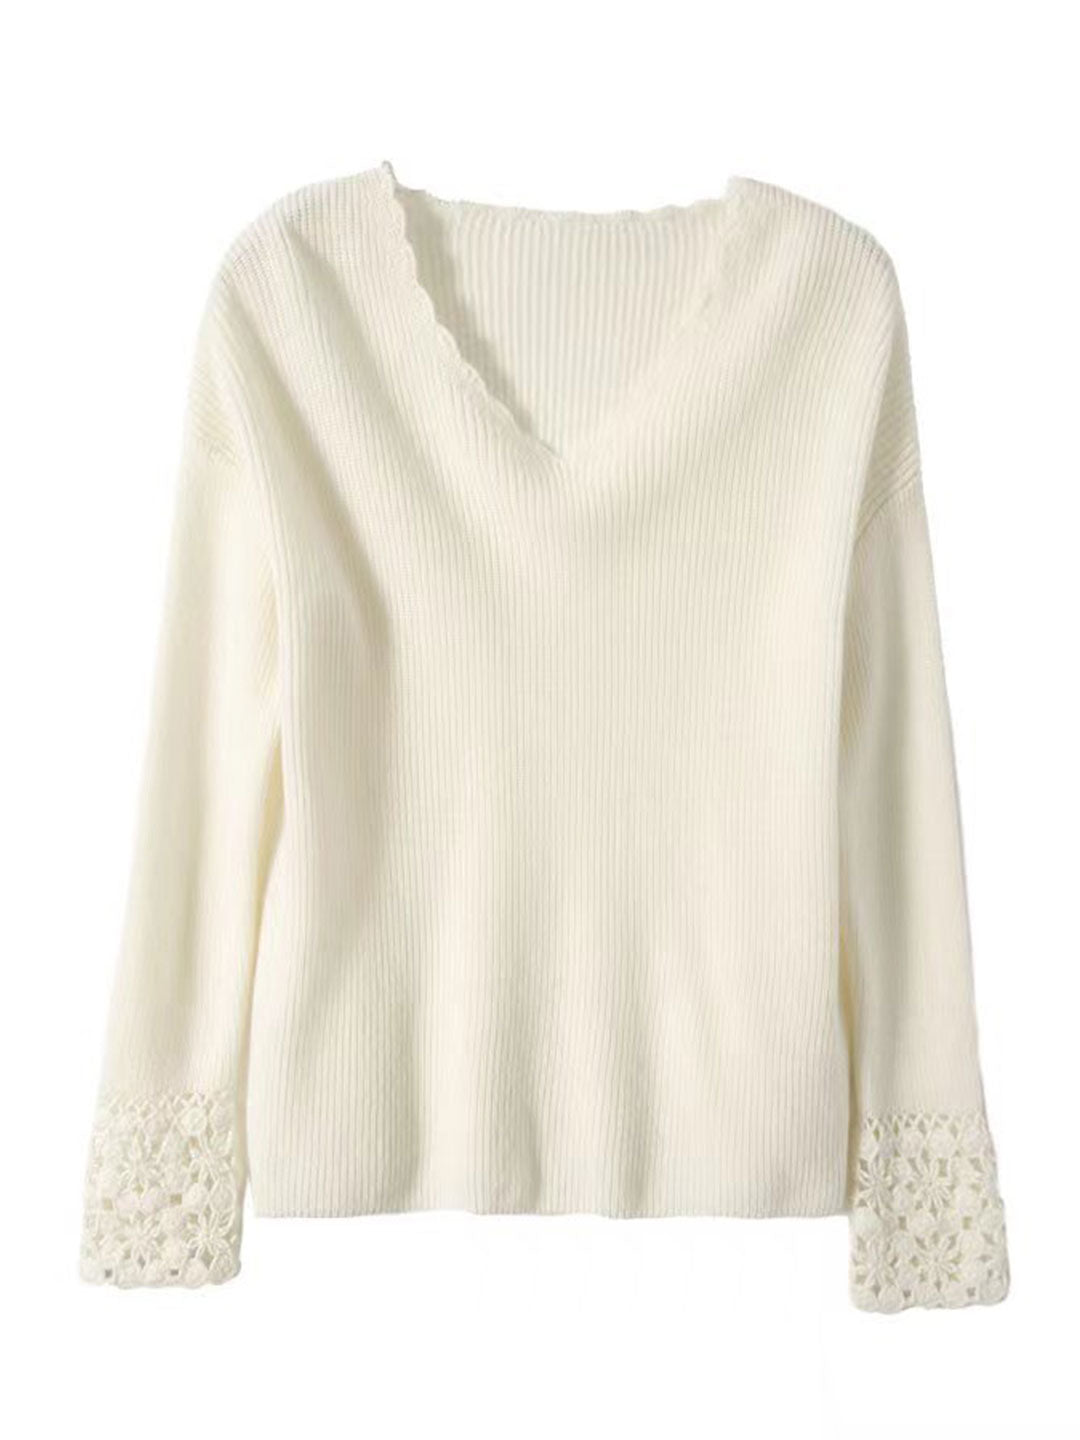 Chloe Retro Hollowed Loose Knitted Pullover Sweater-White